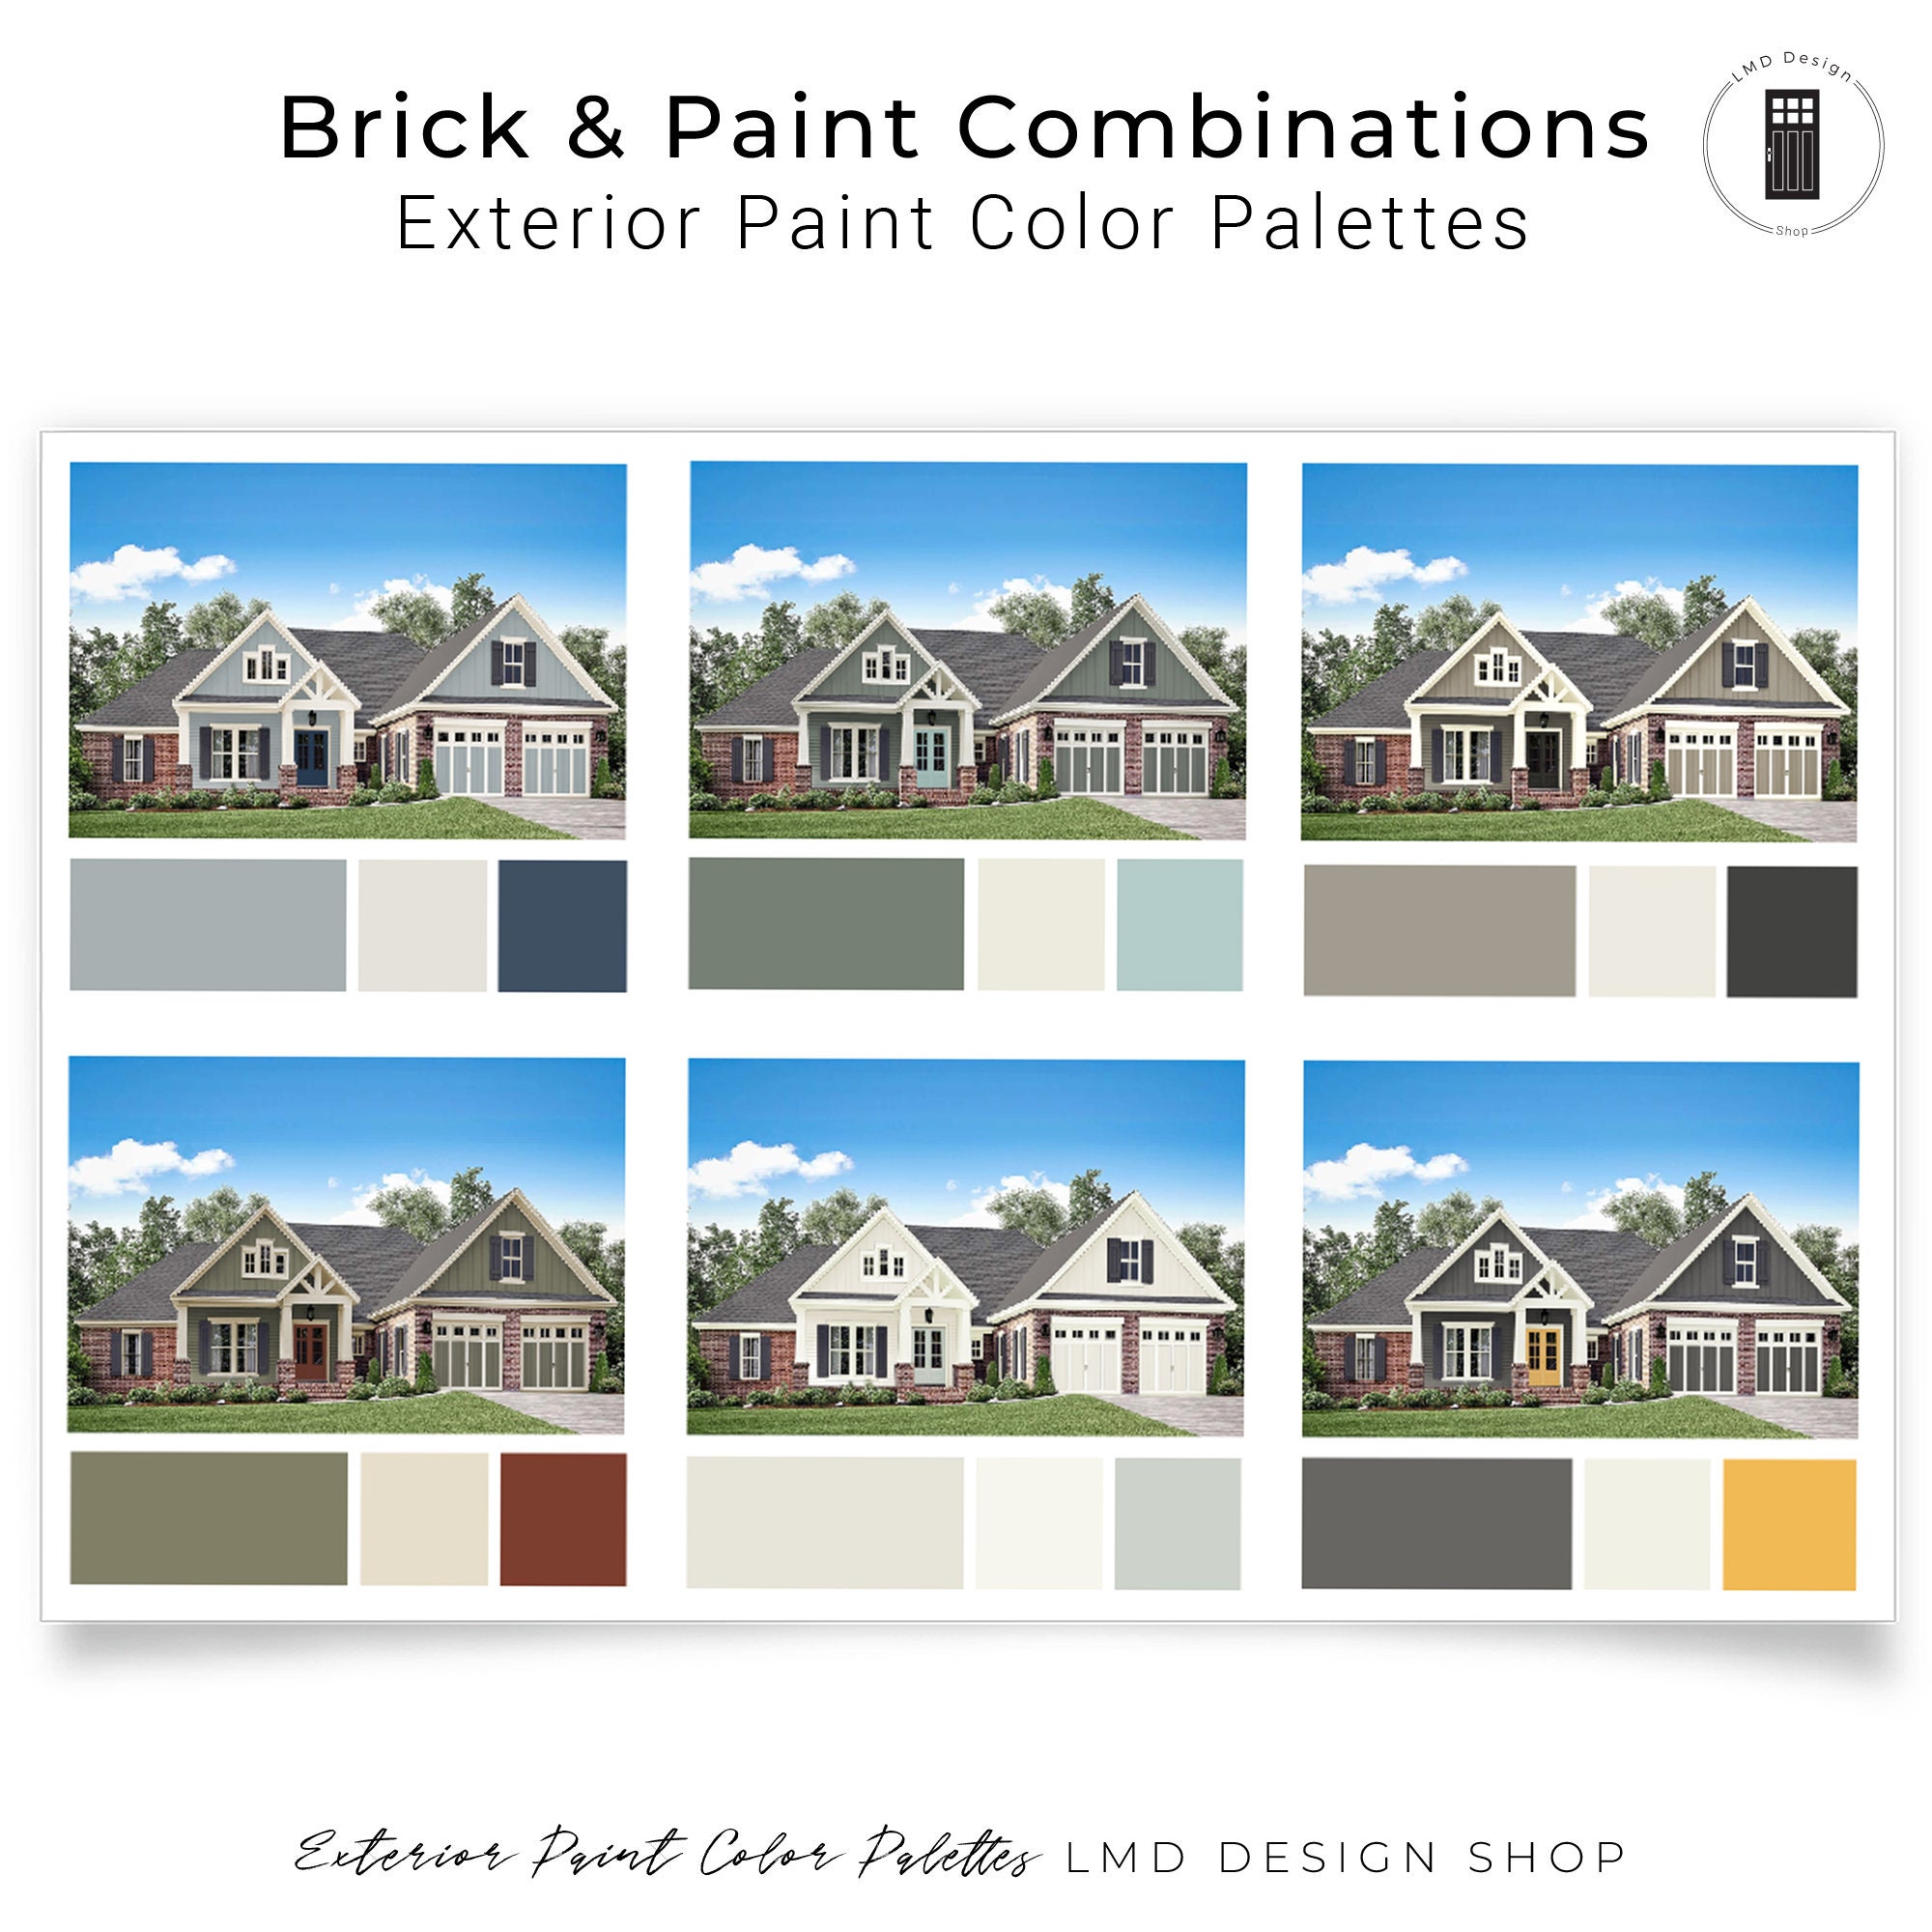 Exterior Paint Colors Chart and Exterior House Paint Color Pairings